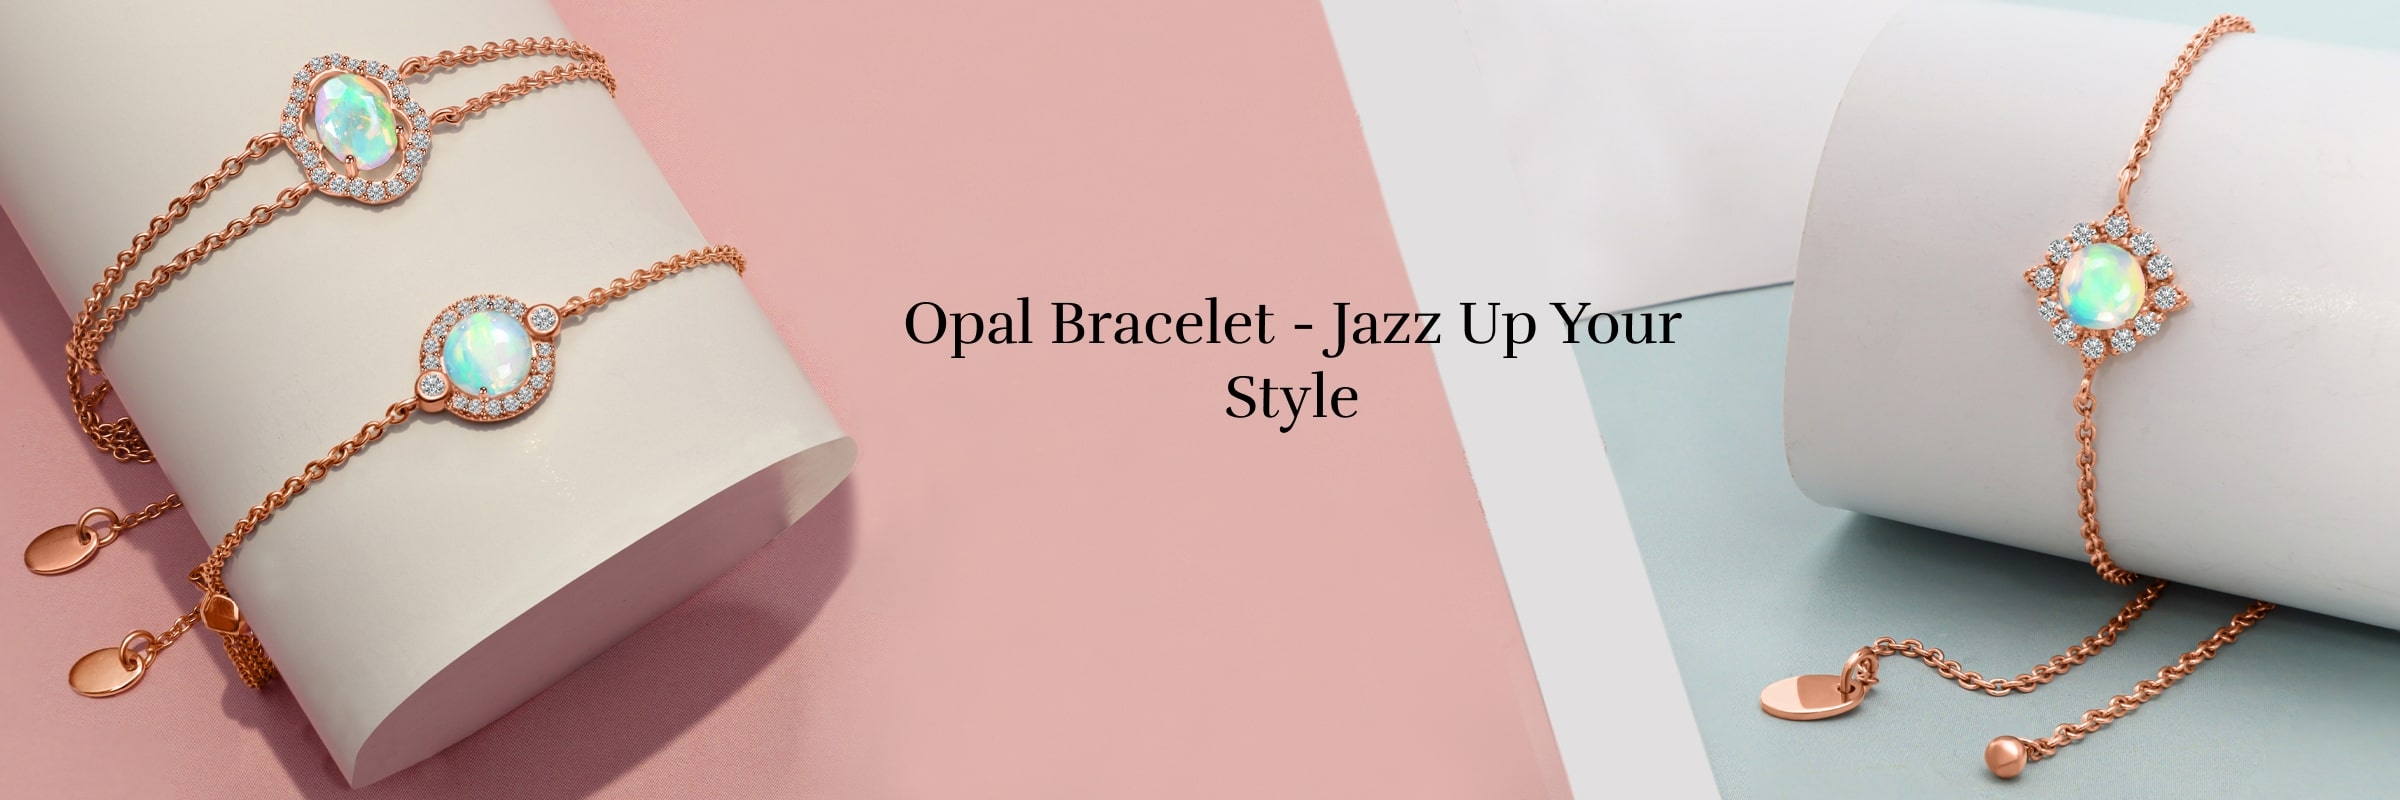 Add The Extra Jazz With A Beautifully Crafted Opal Bracelet